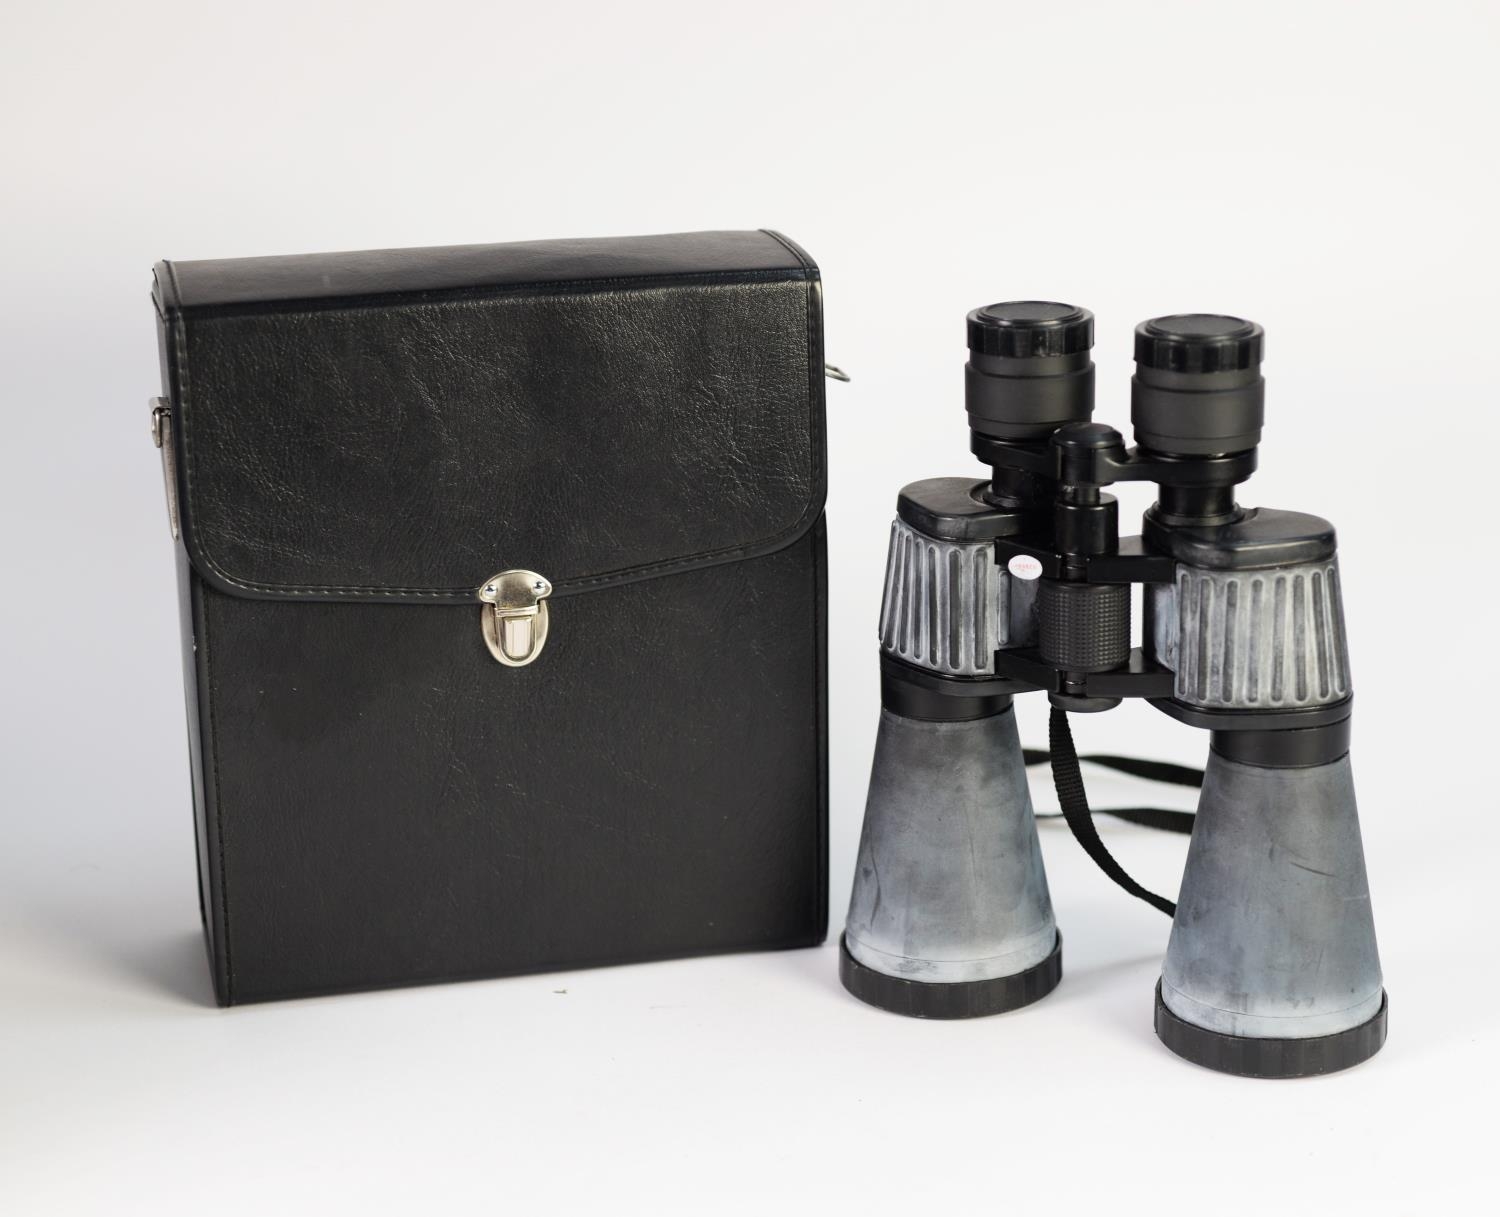 PAIR OF UNBRANDED POST-WAR HIGH MAGNIFICATION BINOCULARS with impact resistant black composition